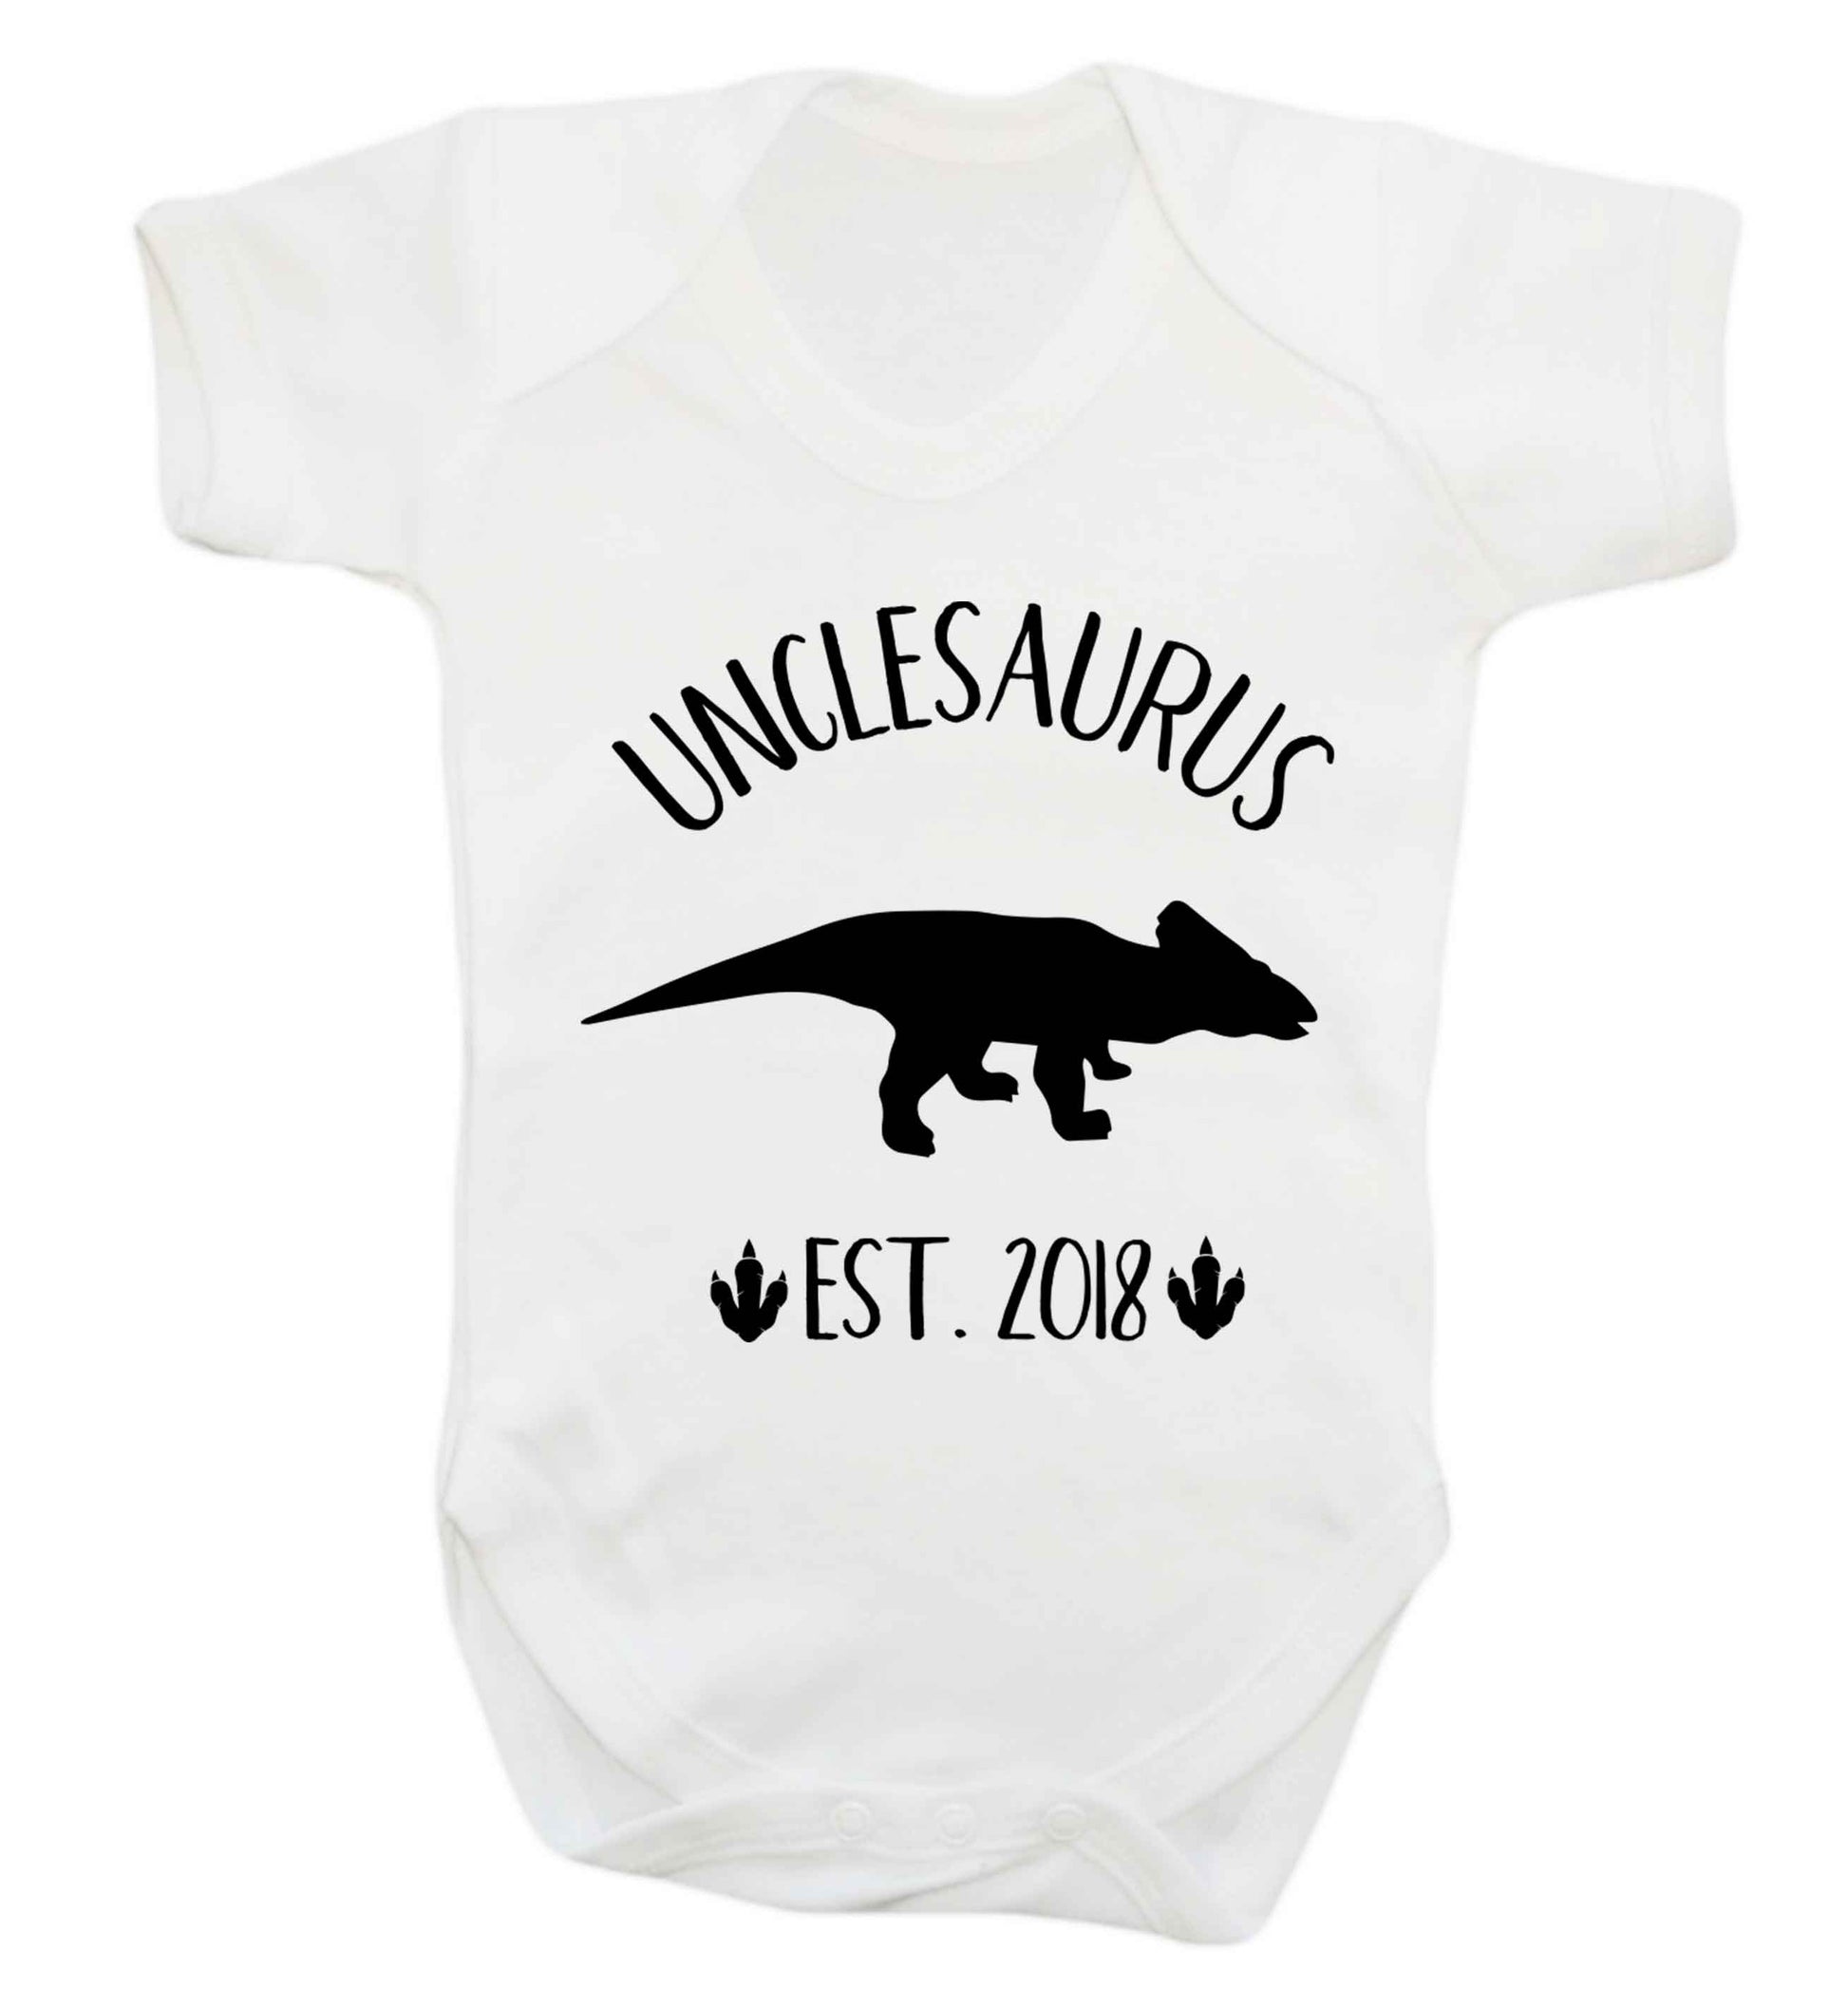 Personalised unclesaurus since (custom date) Baby Vest white 18-24 months